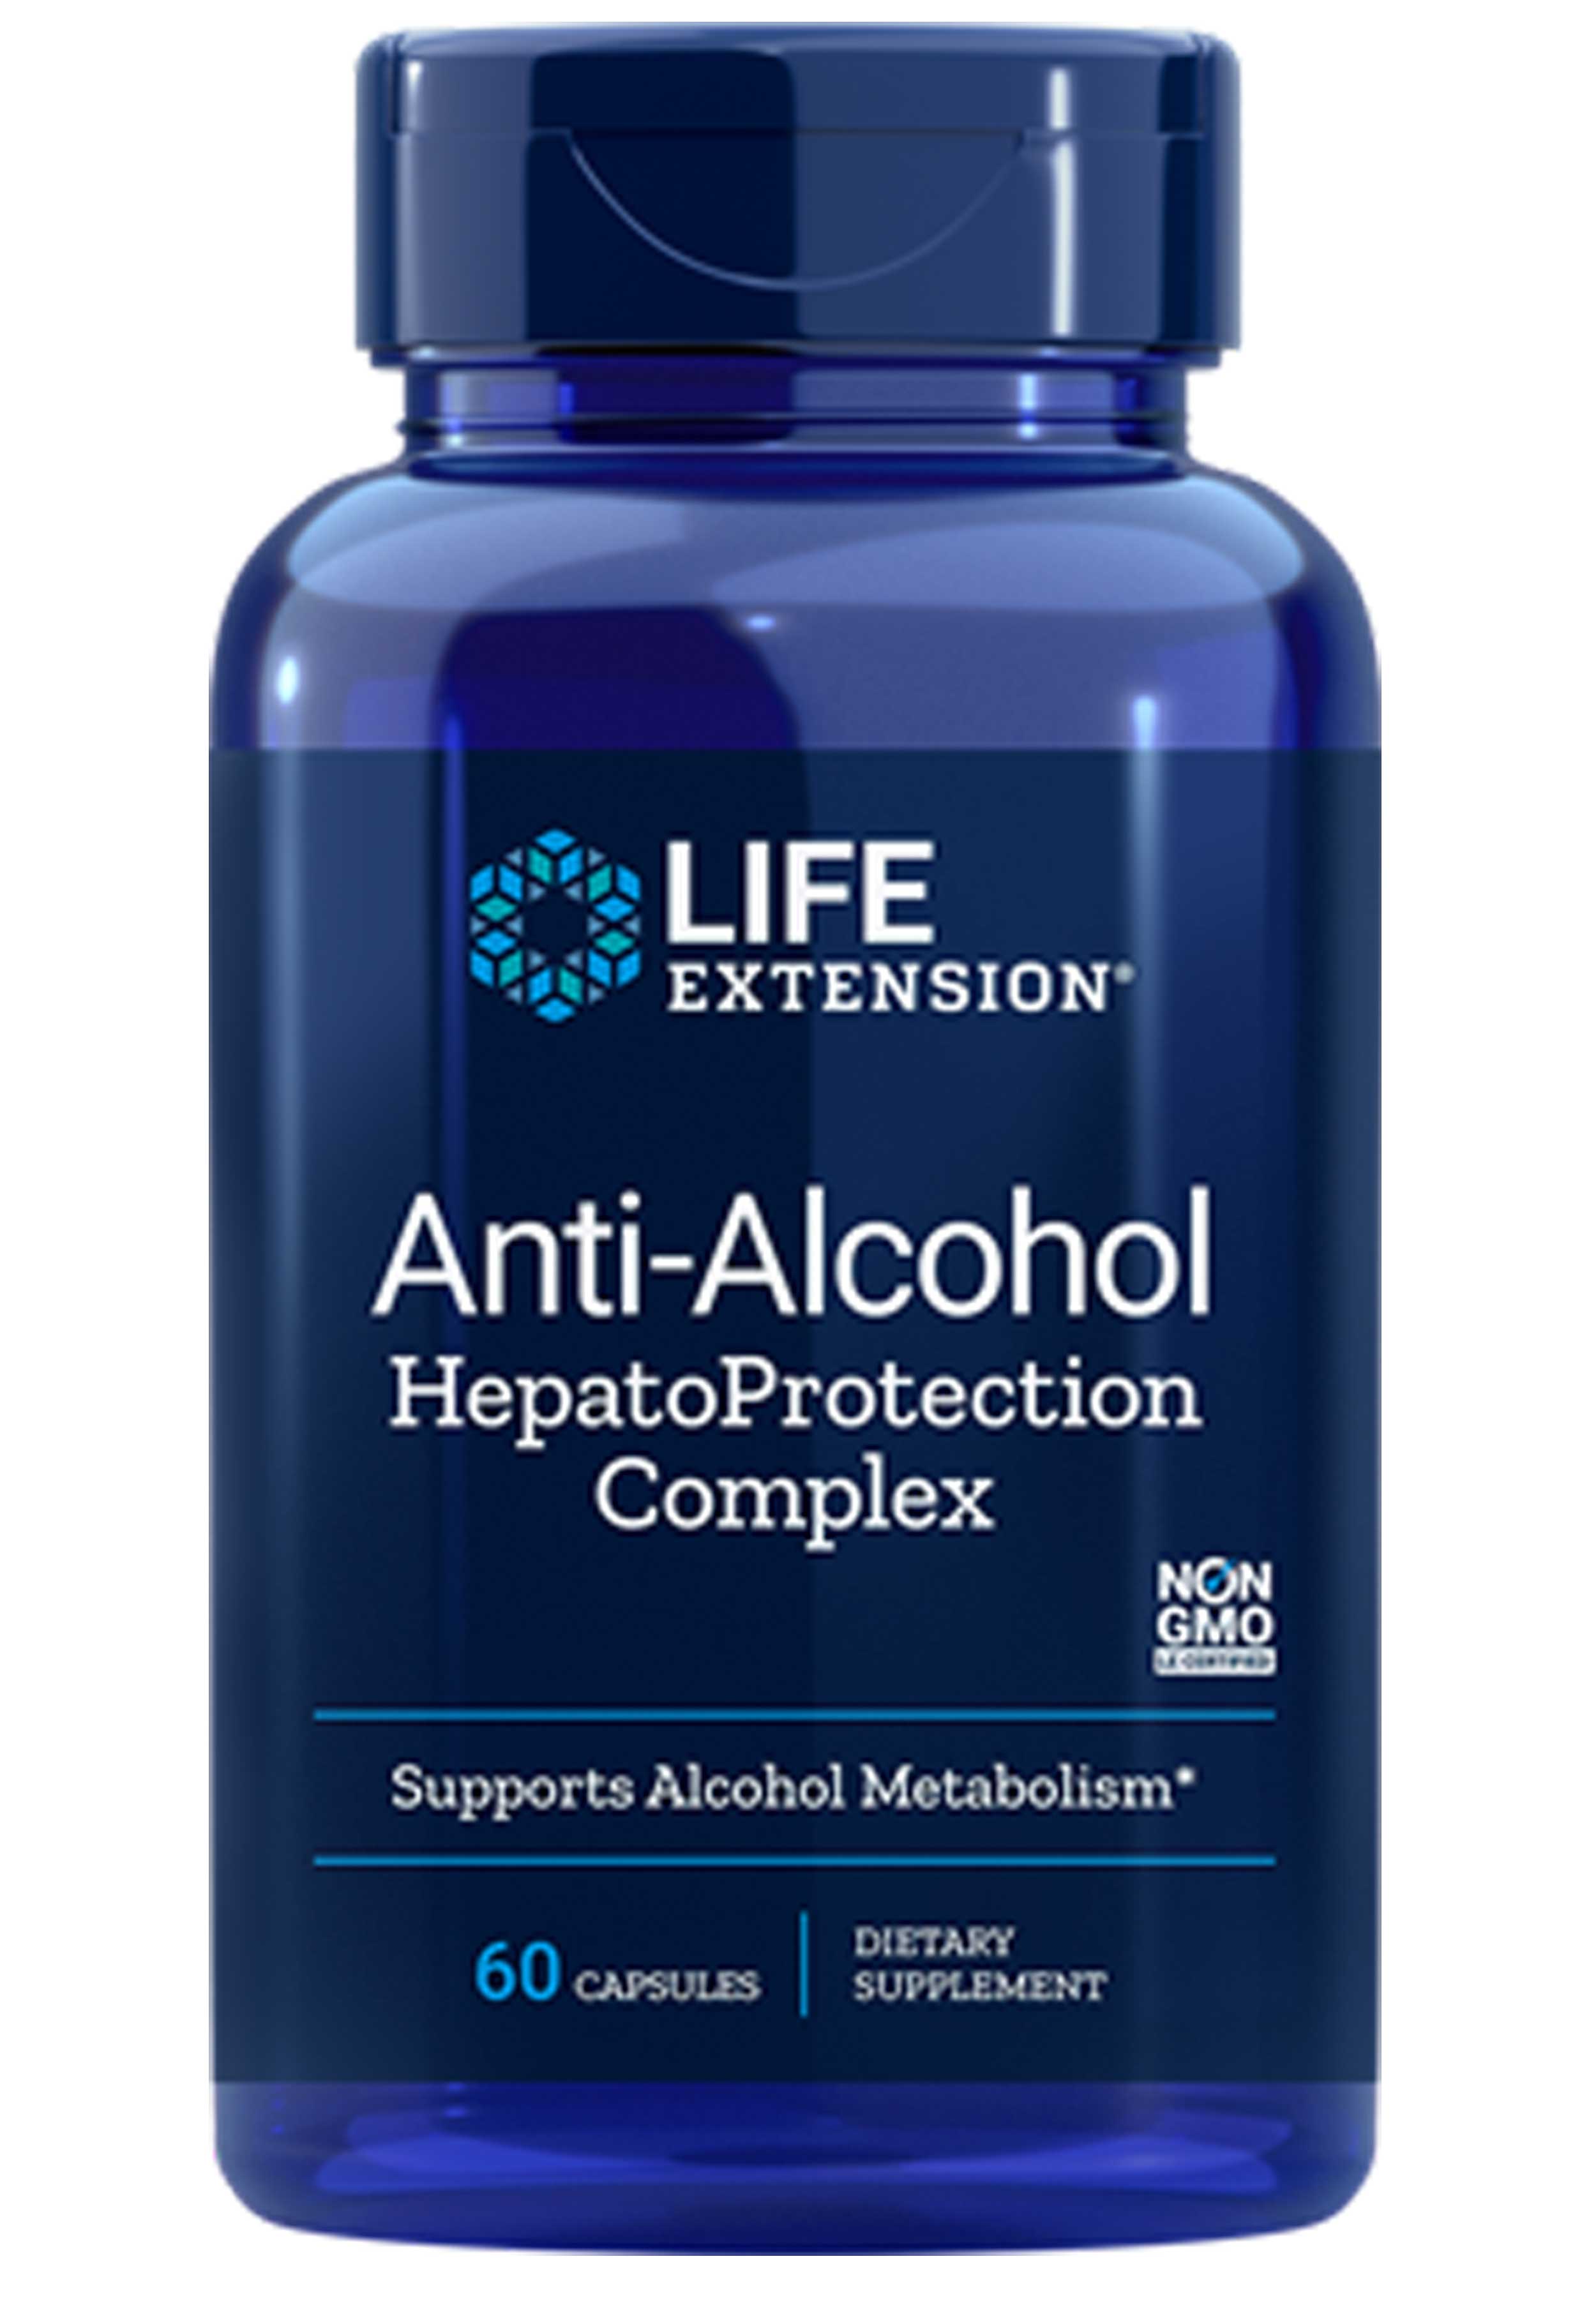 Life Extension Anti-Alcohol Antioxidants with HepatoProtection Complex